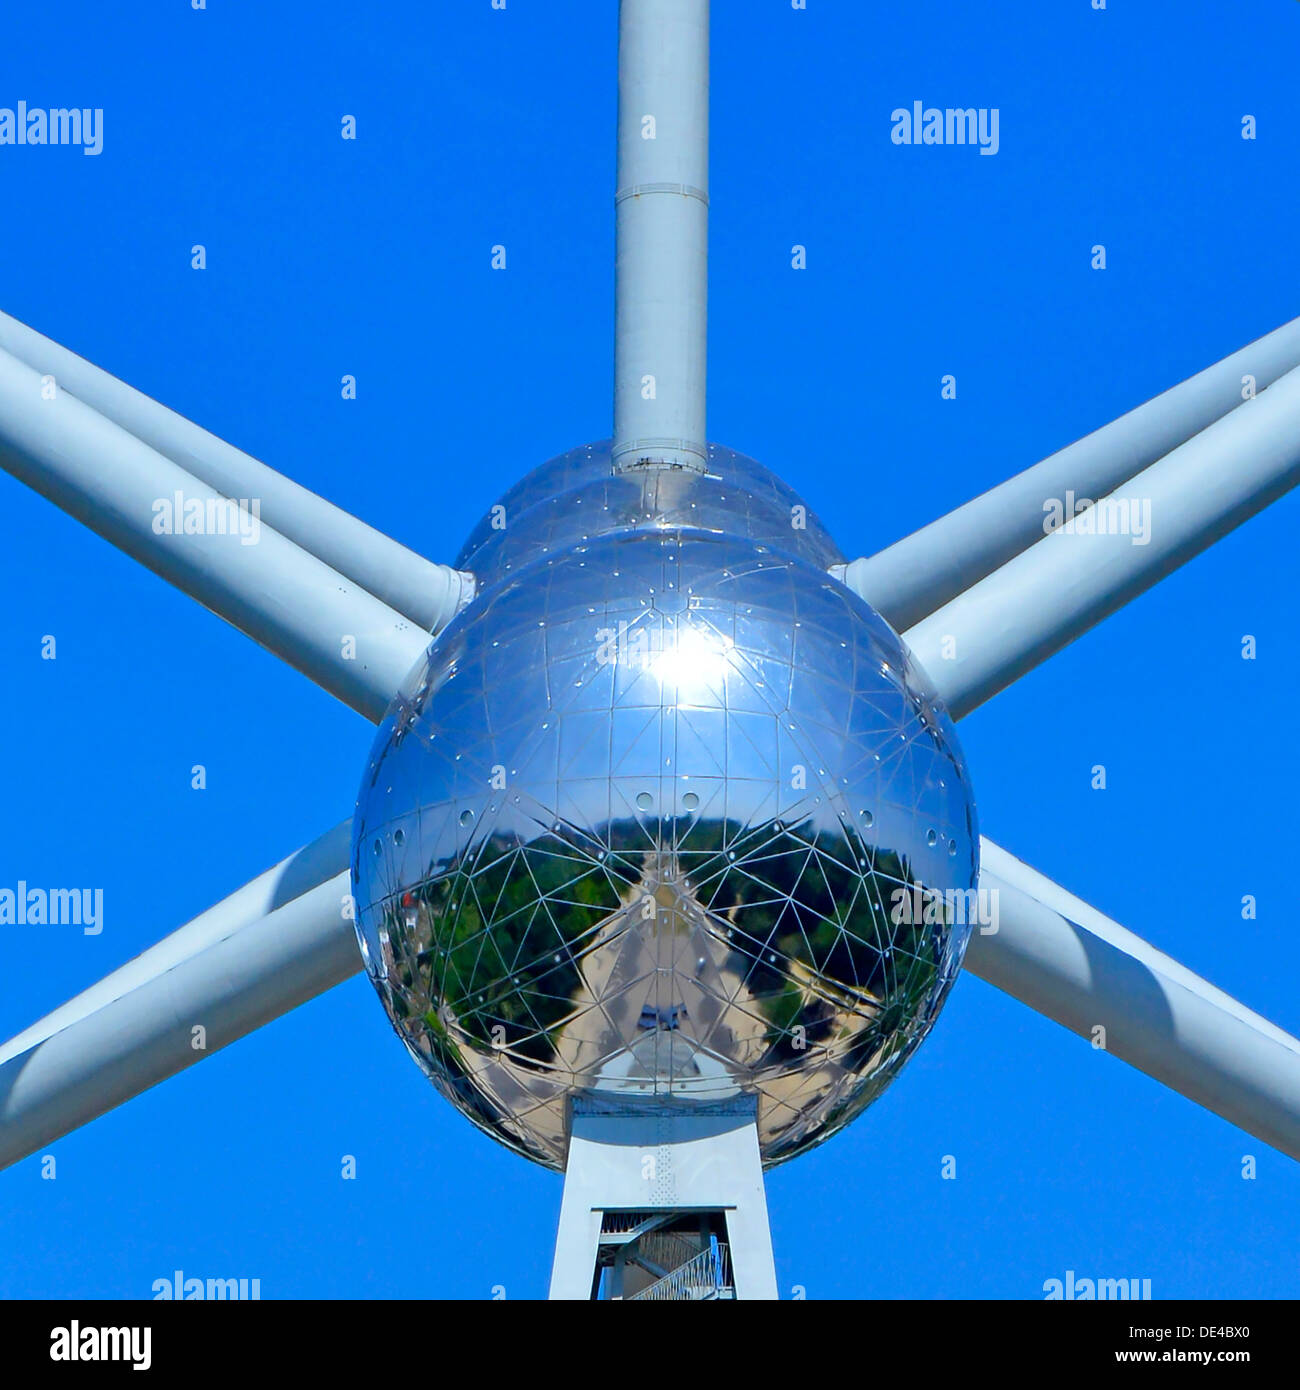 Abstract ball and rods formed from a close up of spheres on the Atomium monument at Brussels Belgium clad in stainless steel Stock Photo